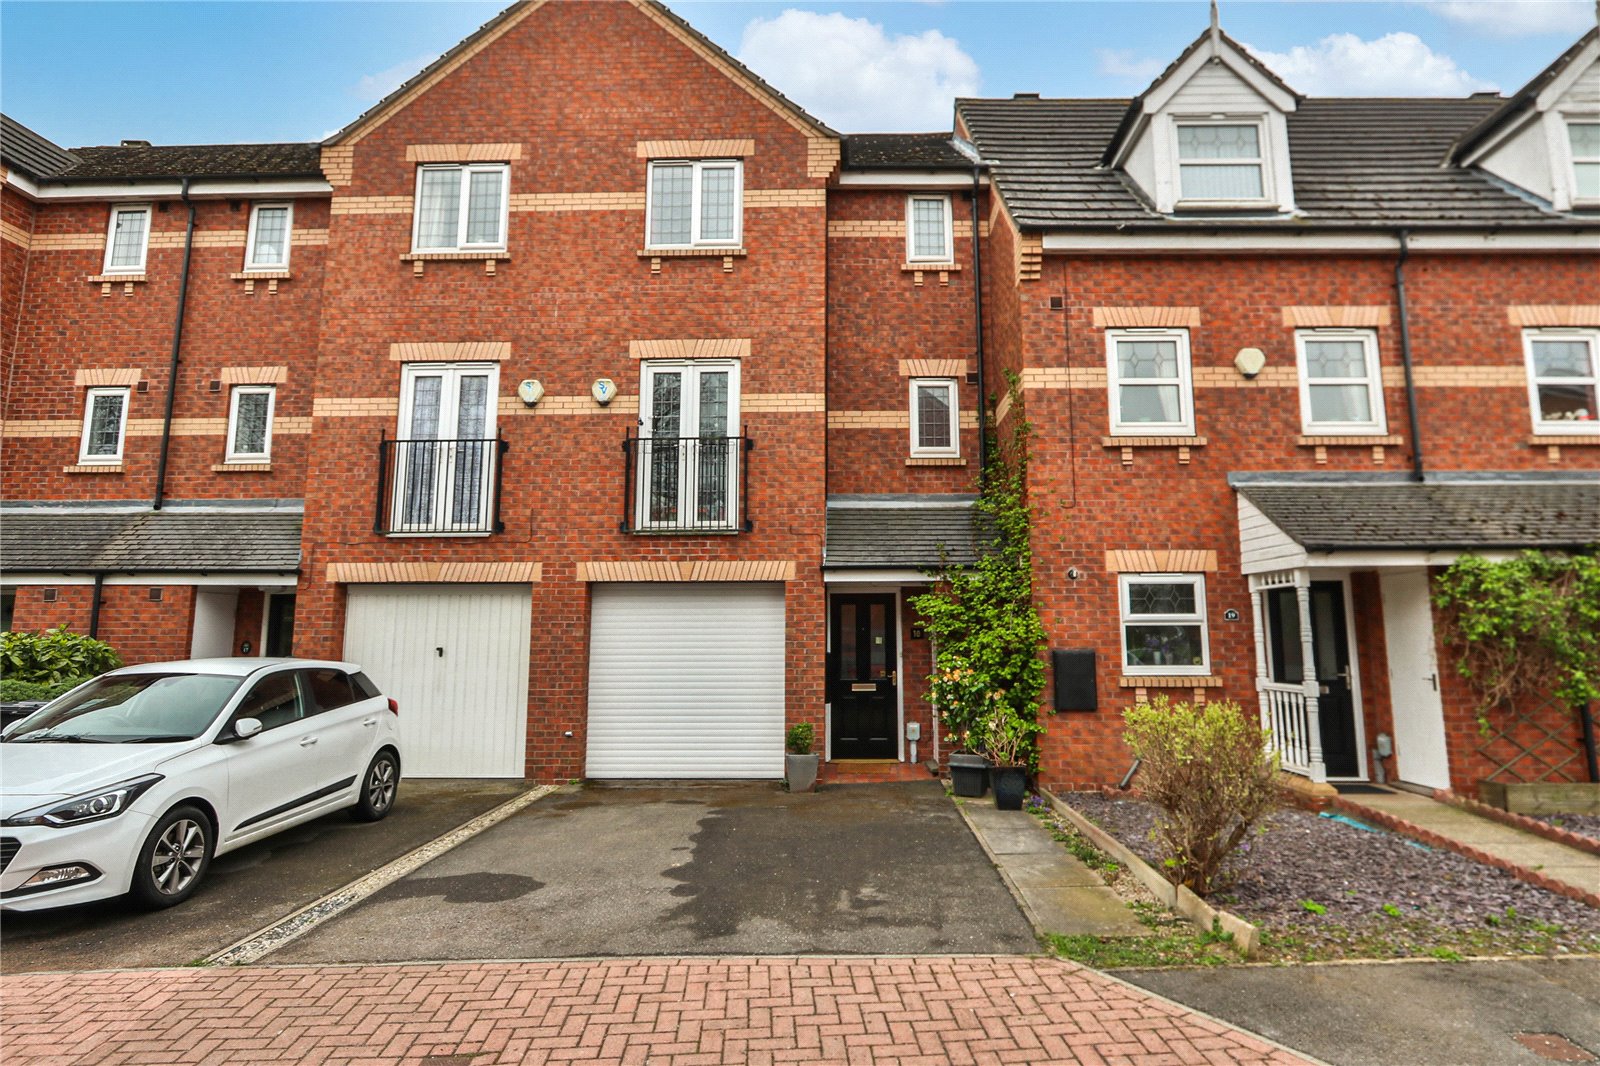 4 bed house for sale in Philip Larkin Close, Hull - Property Image 1